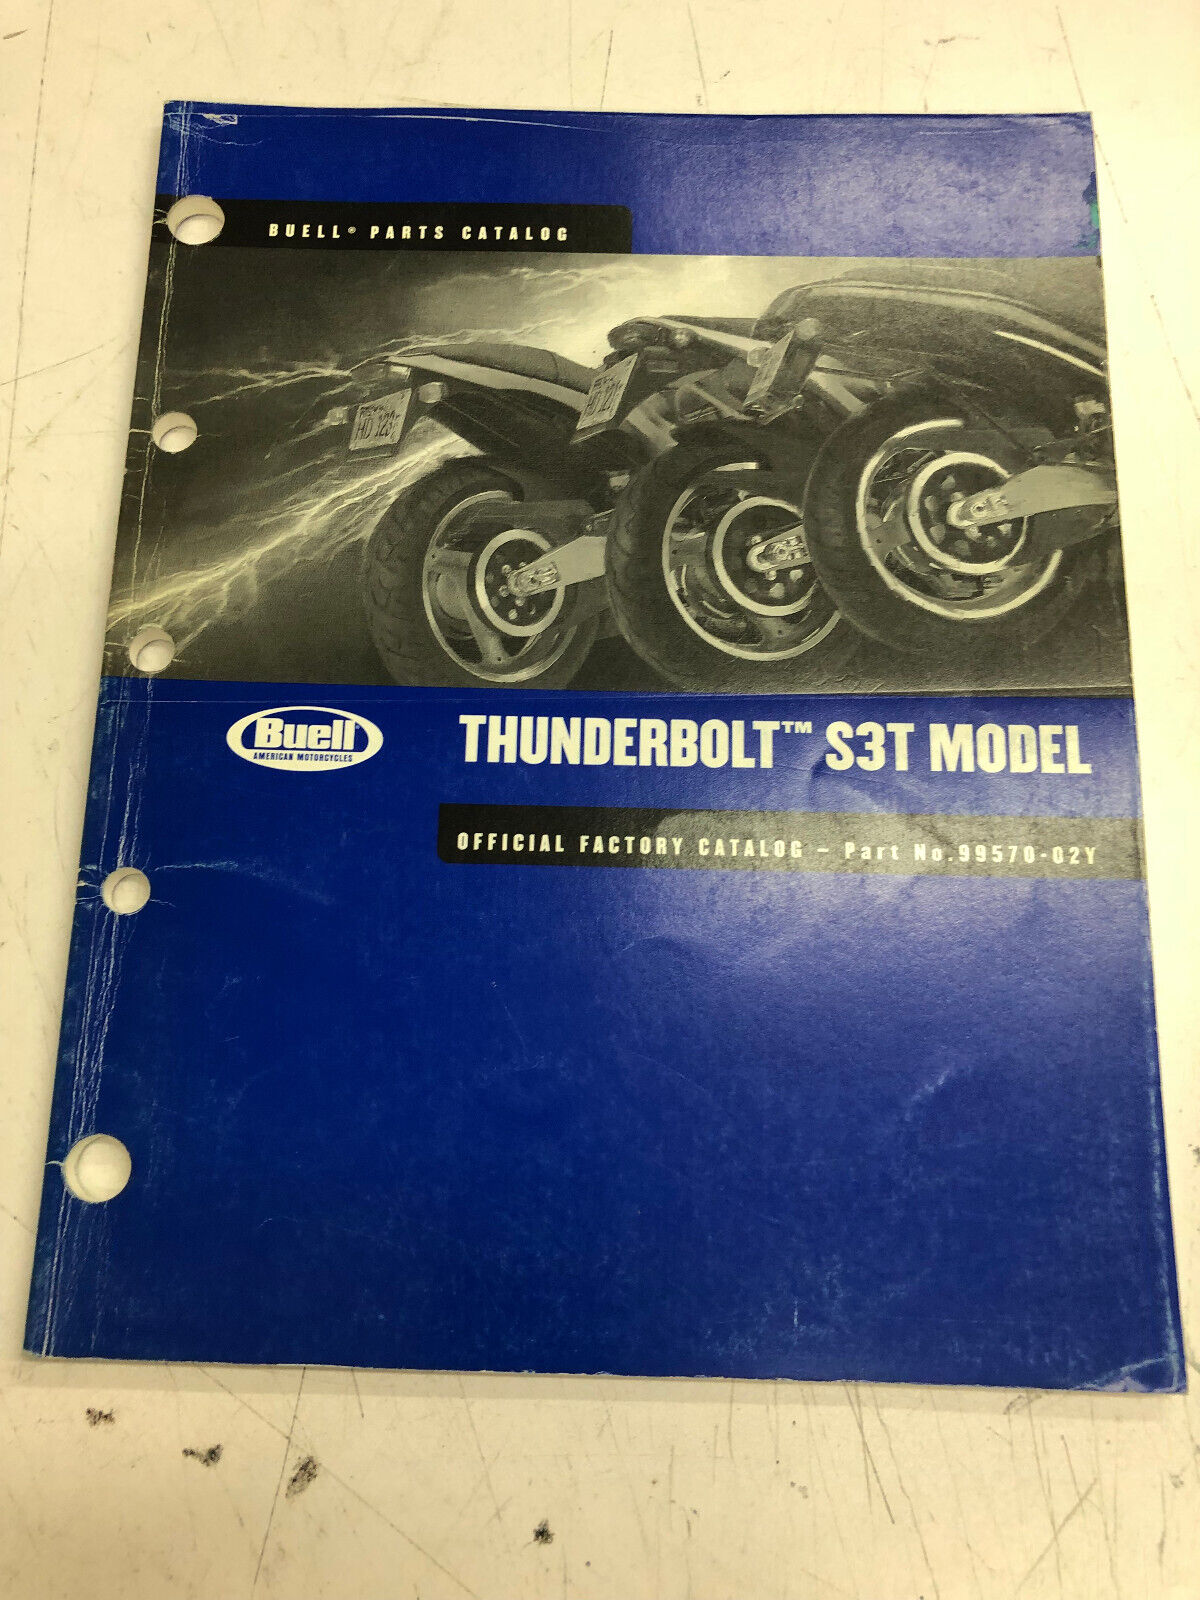 Harley Davidson 2002 Buell Thunderbolt S3t Official Parts Manual 99570-02y (g3 2